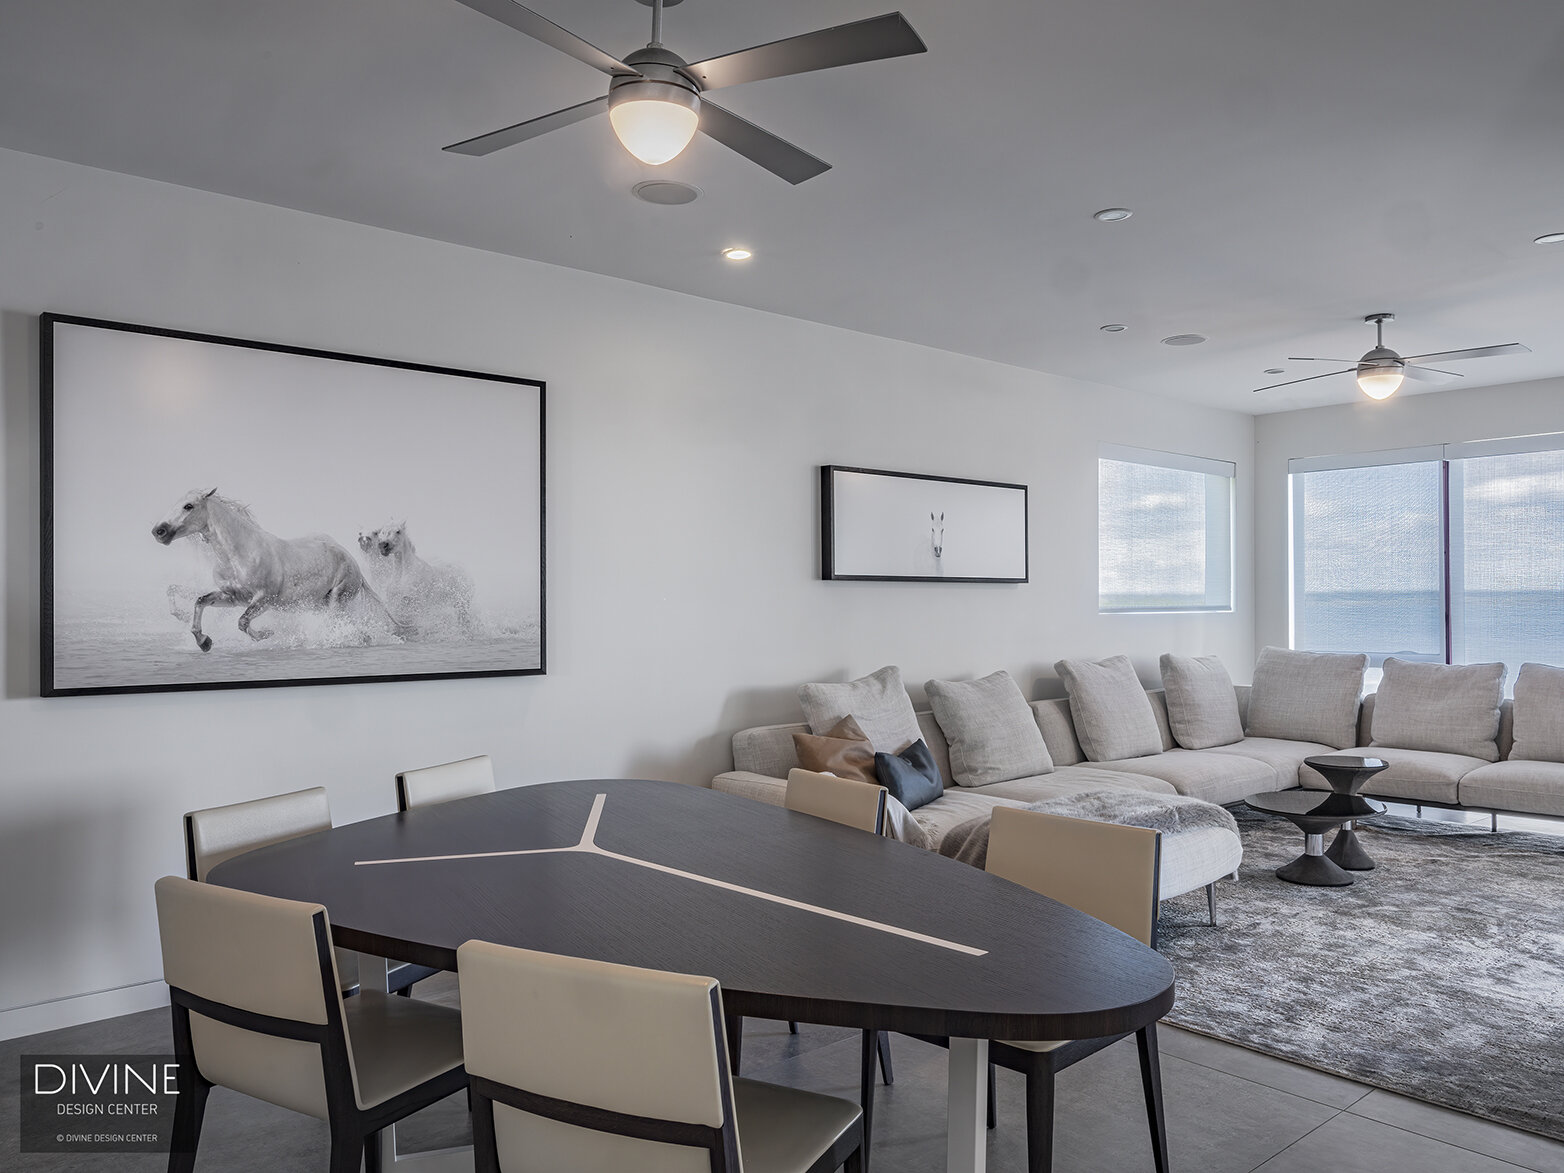  Open concept living/dining space with ocean views. An architectural dining room table accompanies a large grey sectional sofa with modern art hanging on the white painted walls. A large grey, textural rug sits below the sofa.   